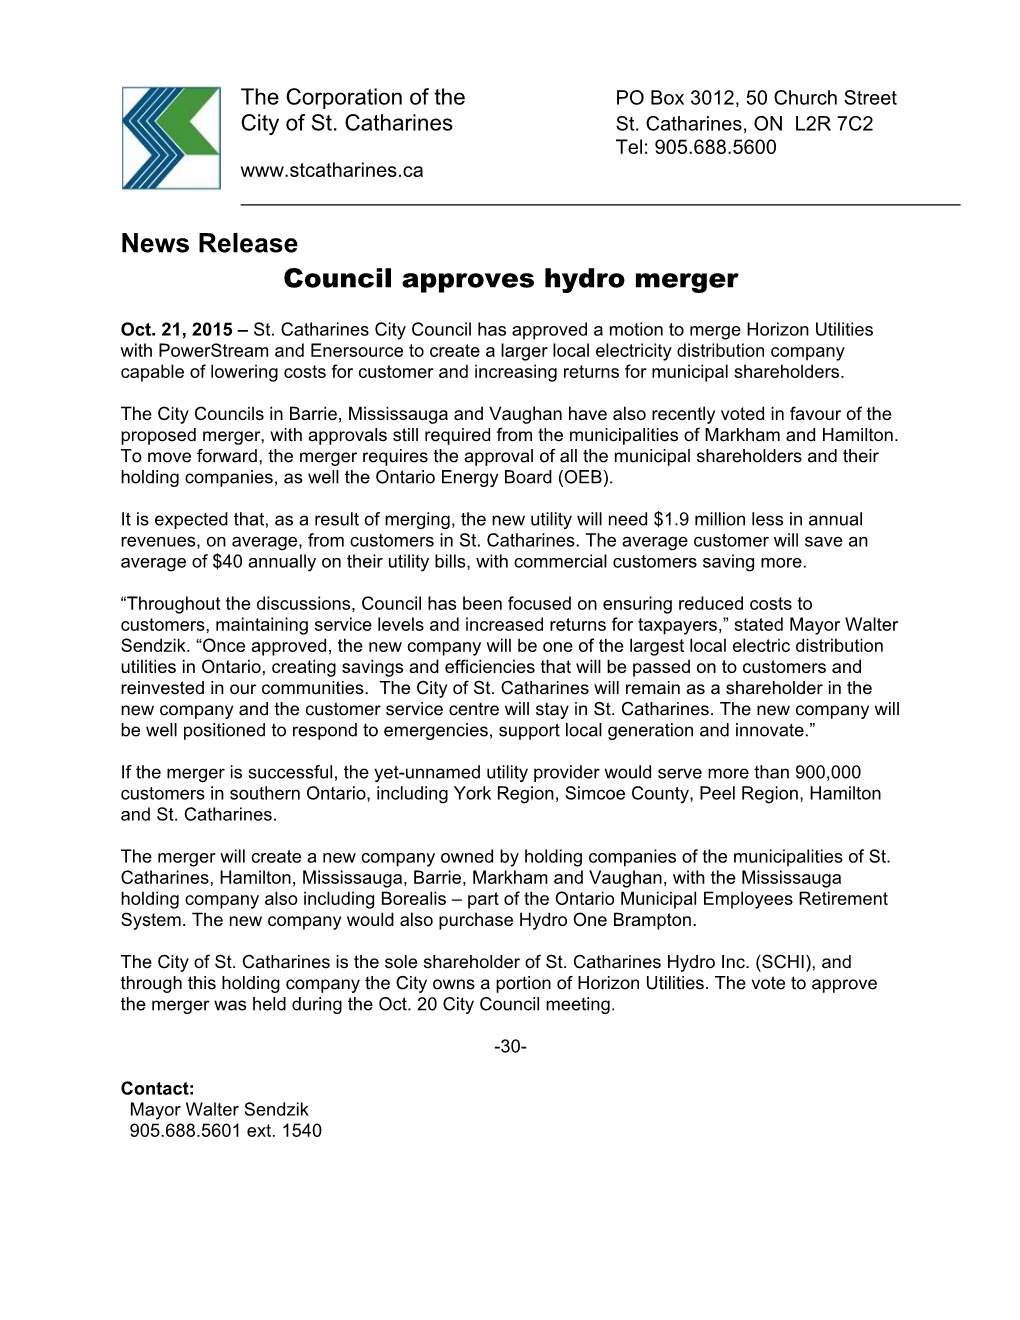 News Release Council Approves Hydro Merger